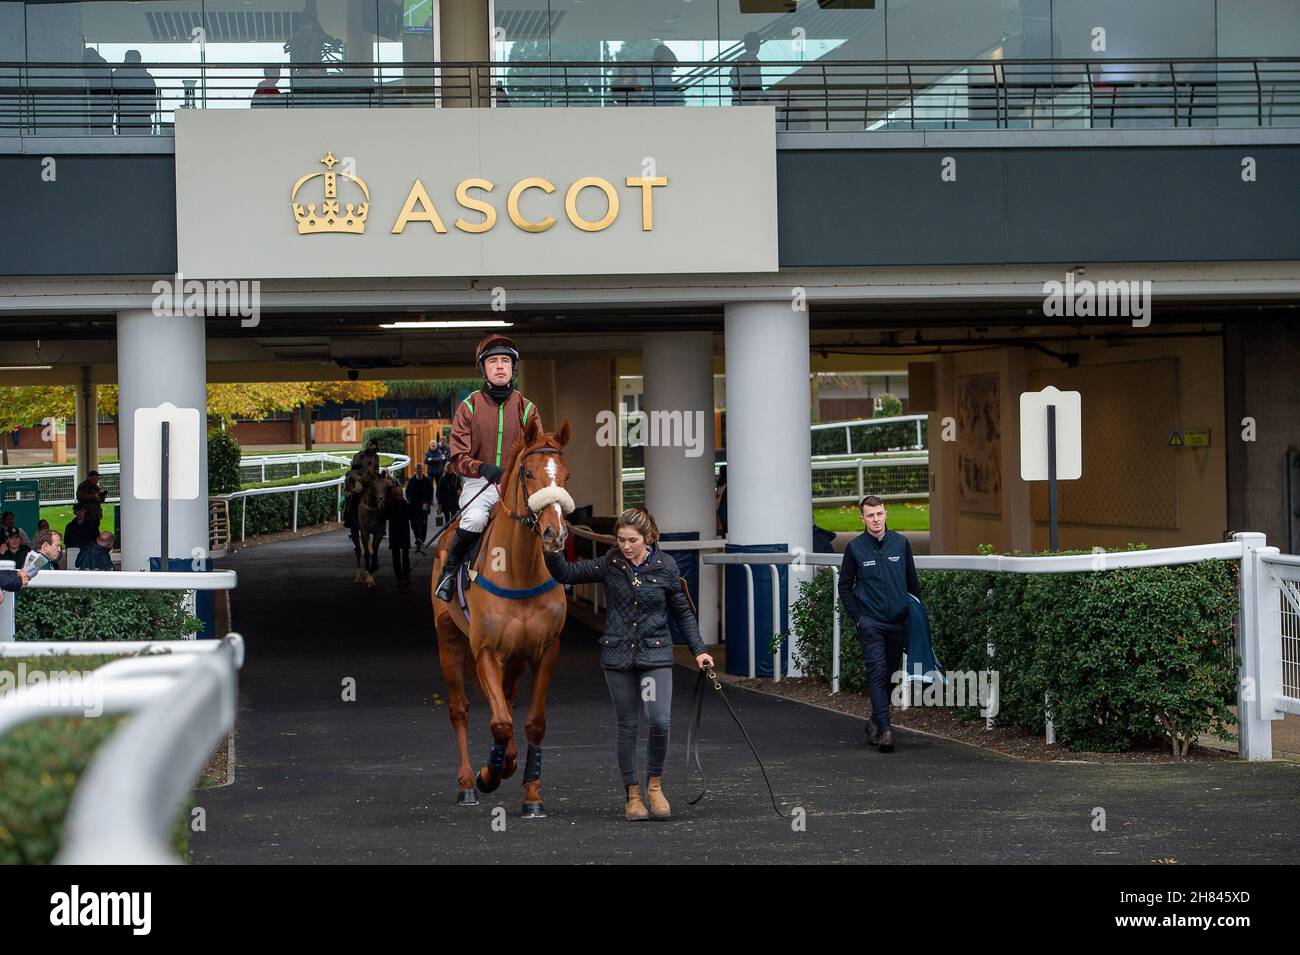 Ascot, Berkshire, UK. 19th November, 2021. Jockey Paul O'Brien on horse Universal Secret (Trainer Helen Nelmes, Dorchester) heads out onto the racetrack at Ascot to race in the Ascot Shop National Hunt Maiden Hurdle Race at Ascot. Credit: Maureen McLean/Alamy Stock Photo